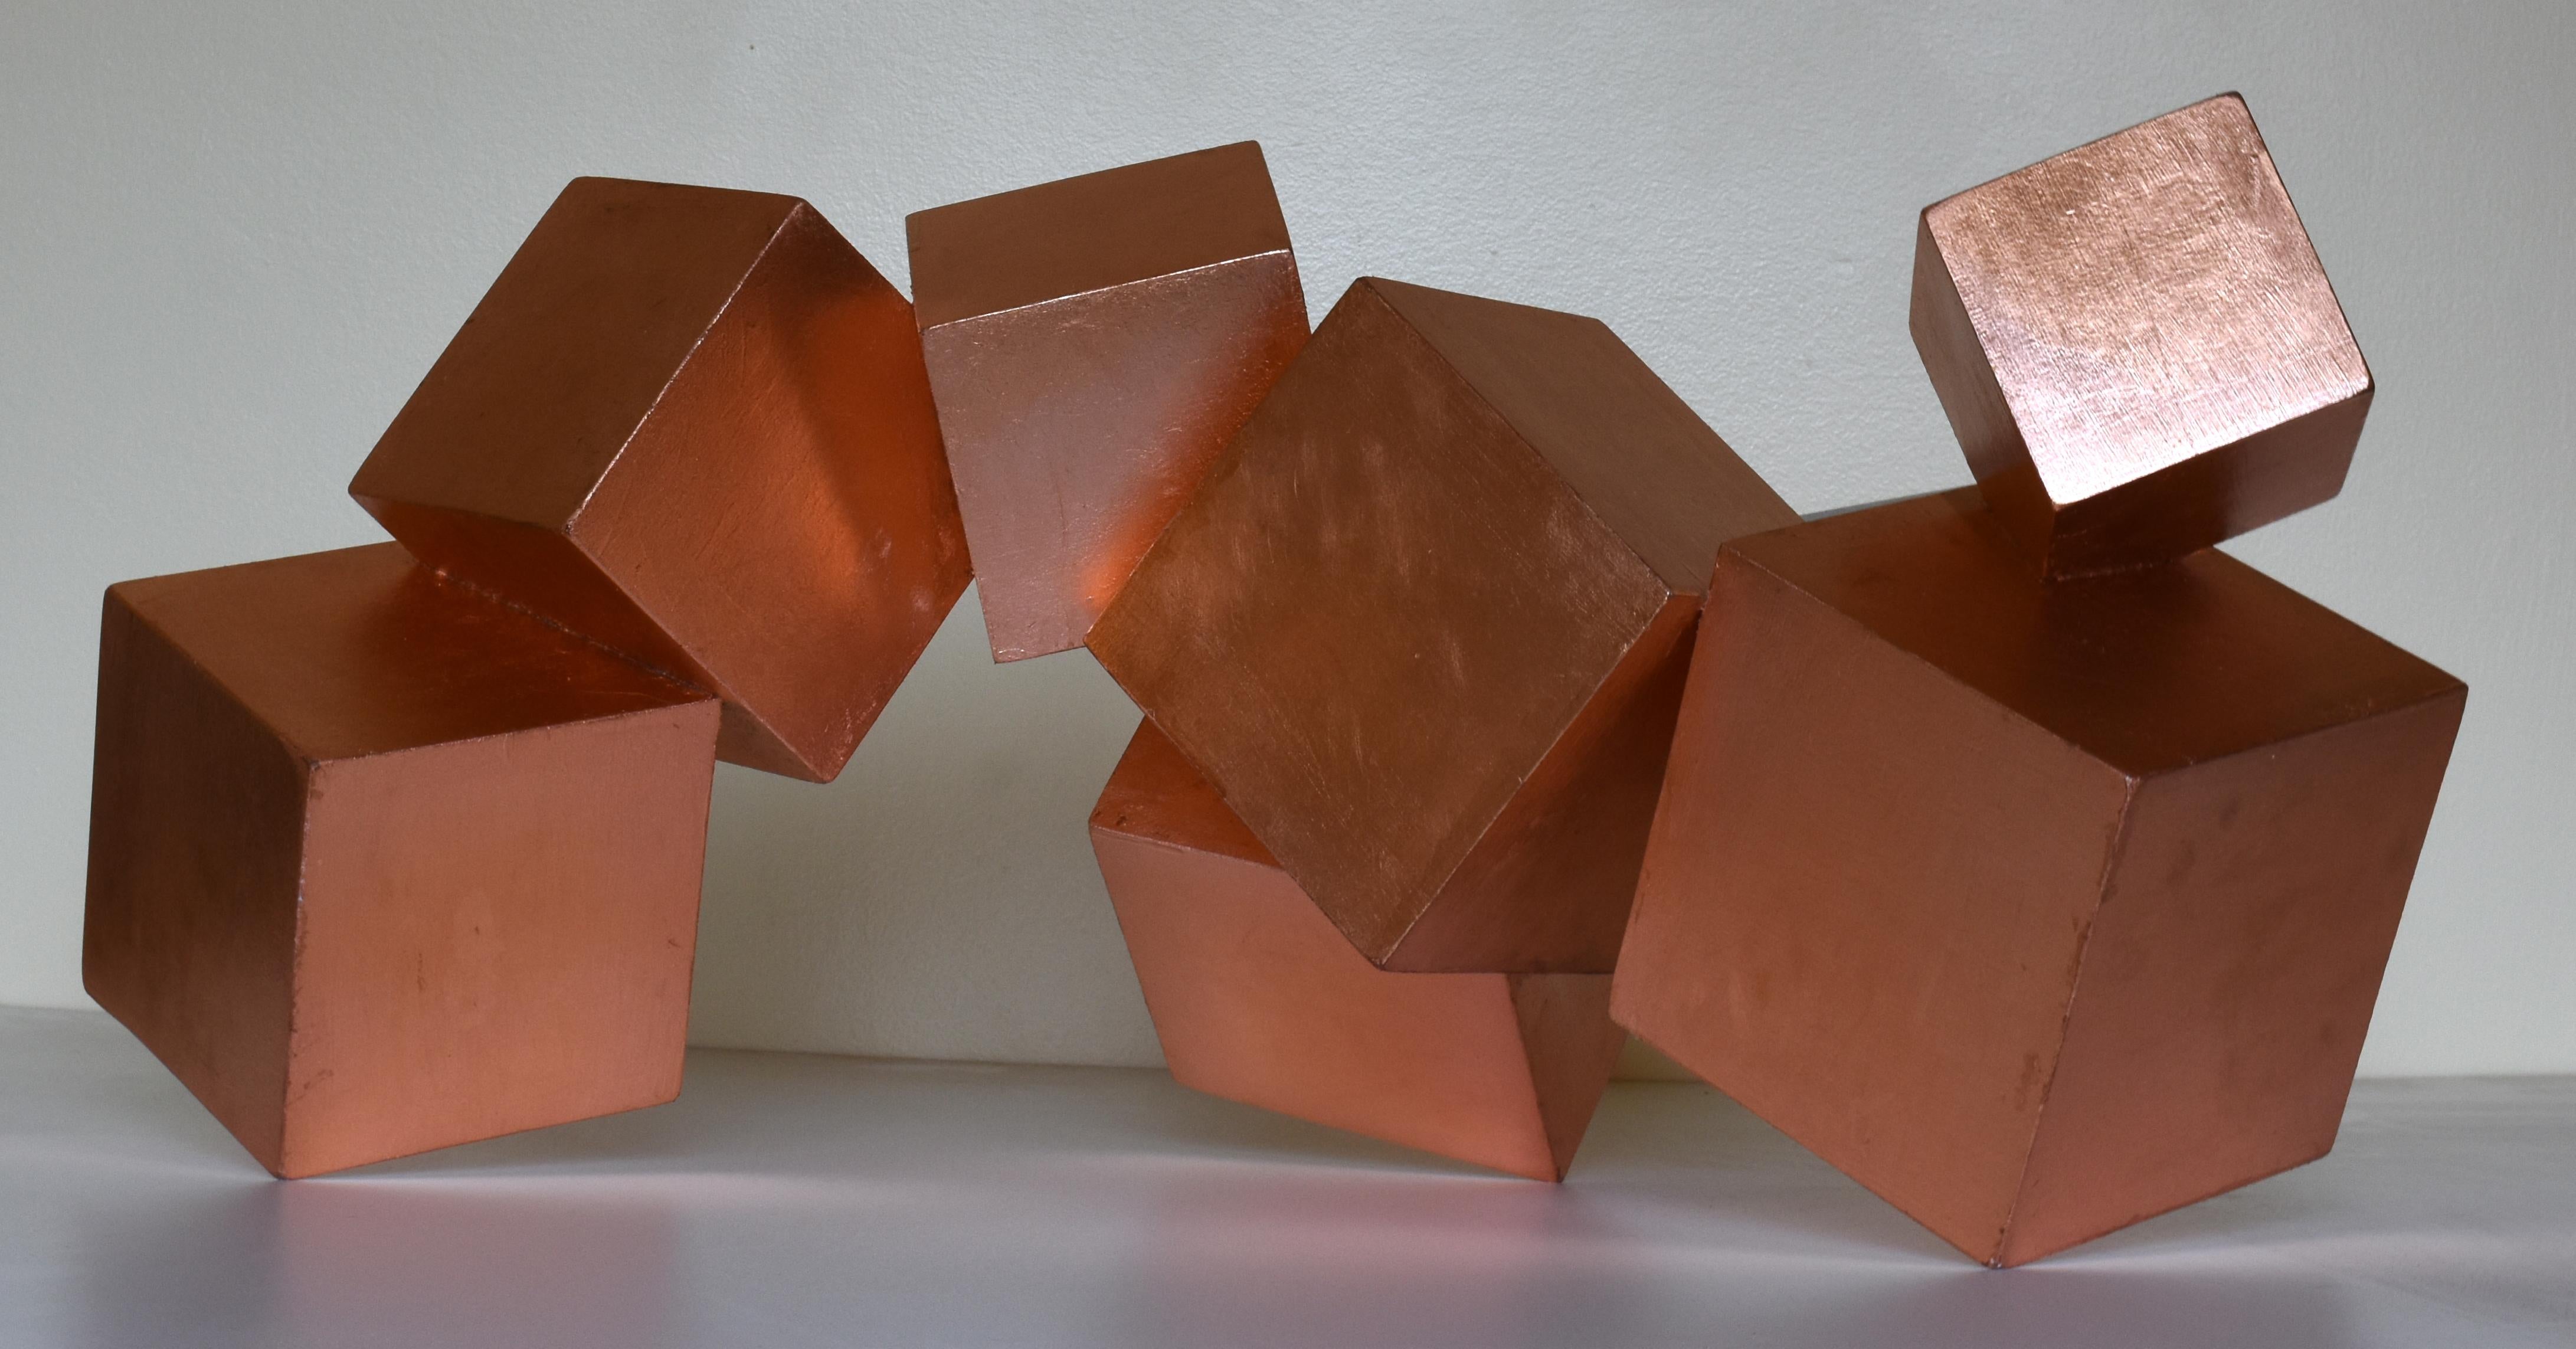 Copper and Mahogany Pyrite (exotic wood, metallic, cubic, table top sculpture) - Abstract Geometric Sculpture by Chloe Hedden